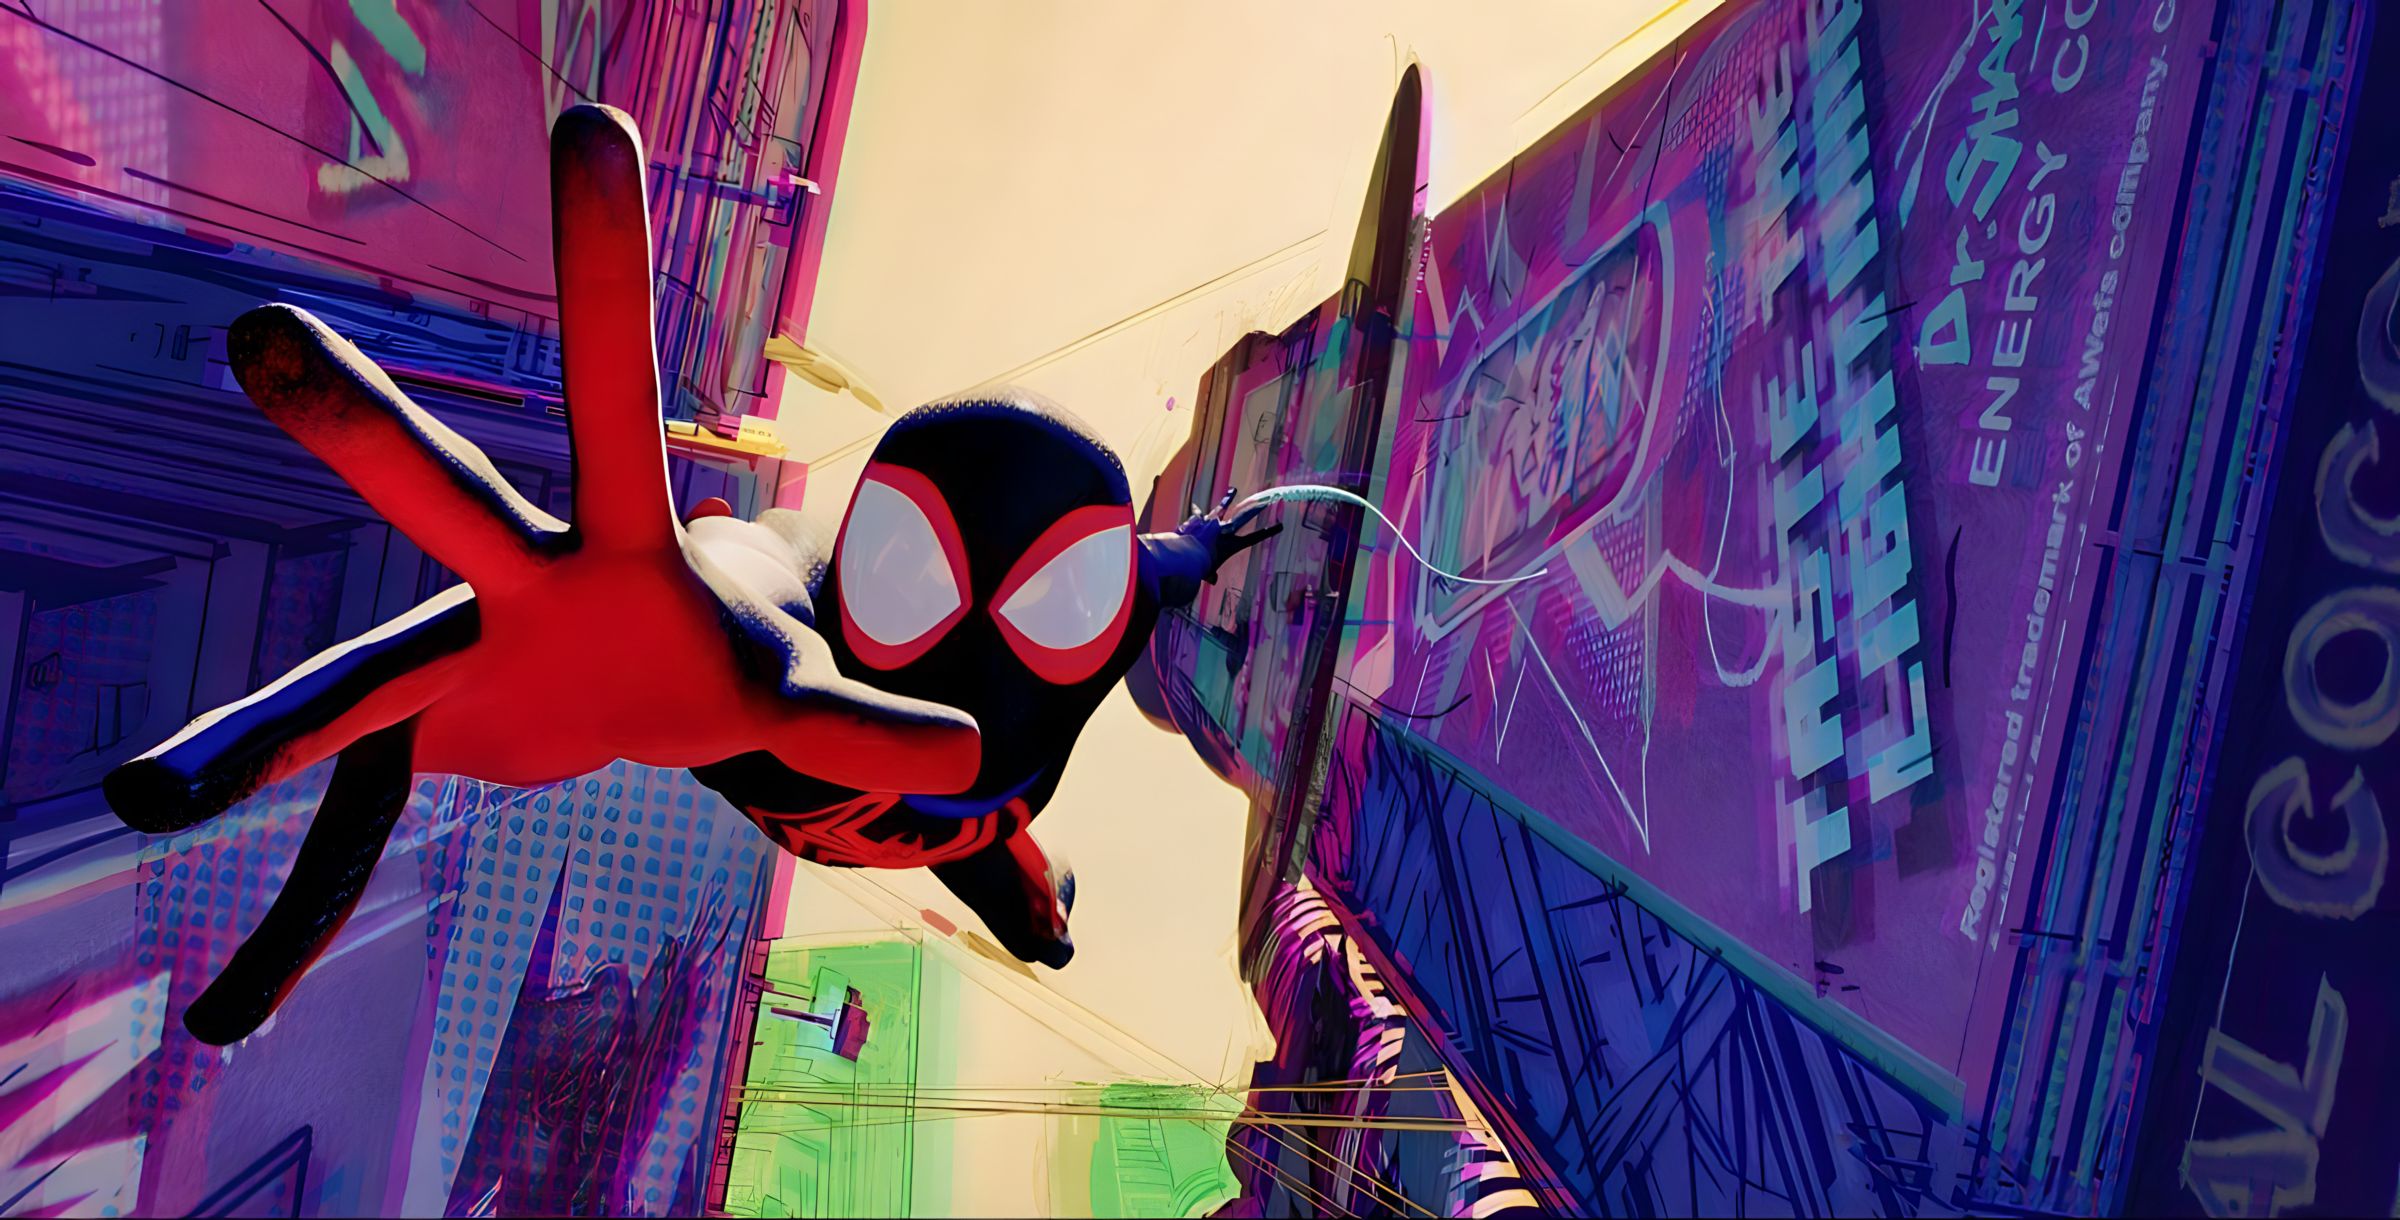 General 2400x1220 spider Spider-Man Spider-Man: Across the Spider-Verse Marvel Comics superhero bodysuit falling looking at viewer arms reaching low-angle worm's eye view digital art Girls Aloud Miles Morales